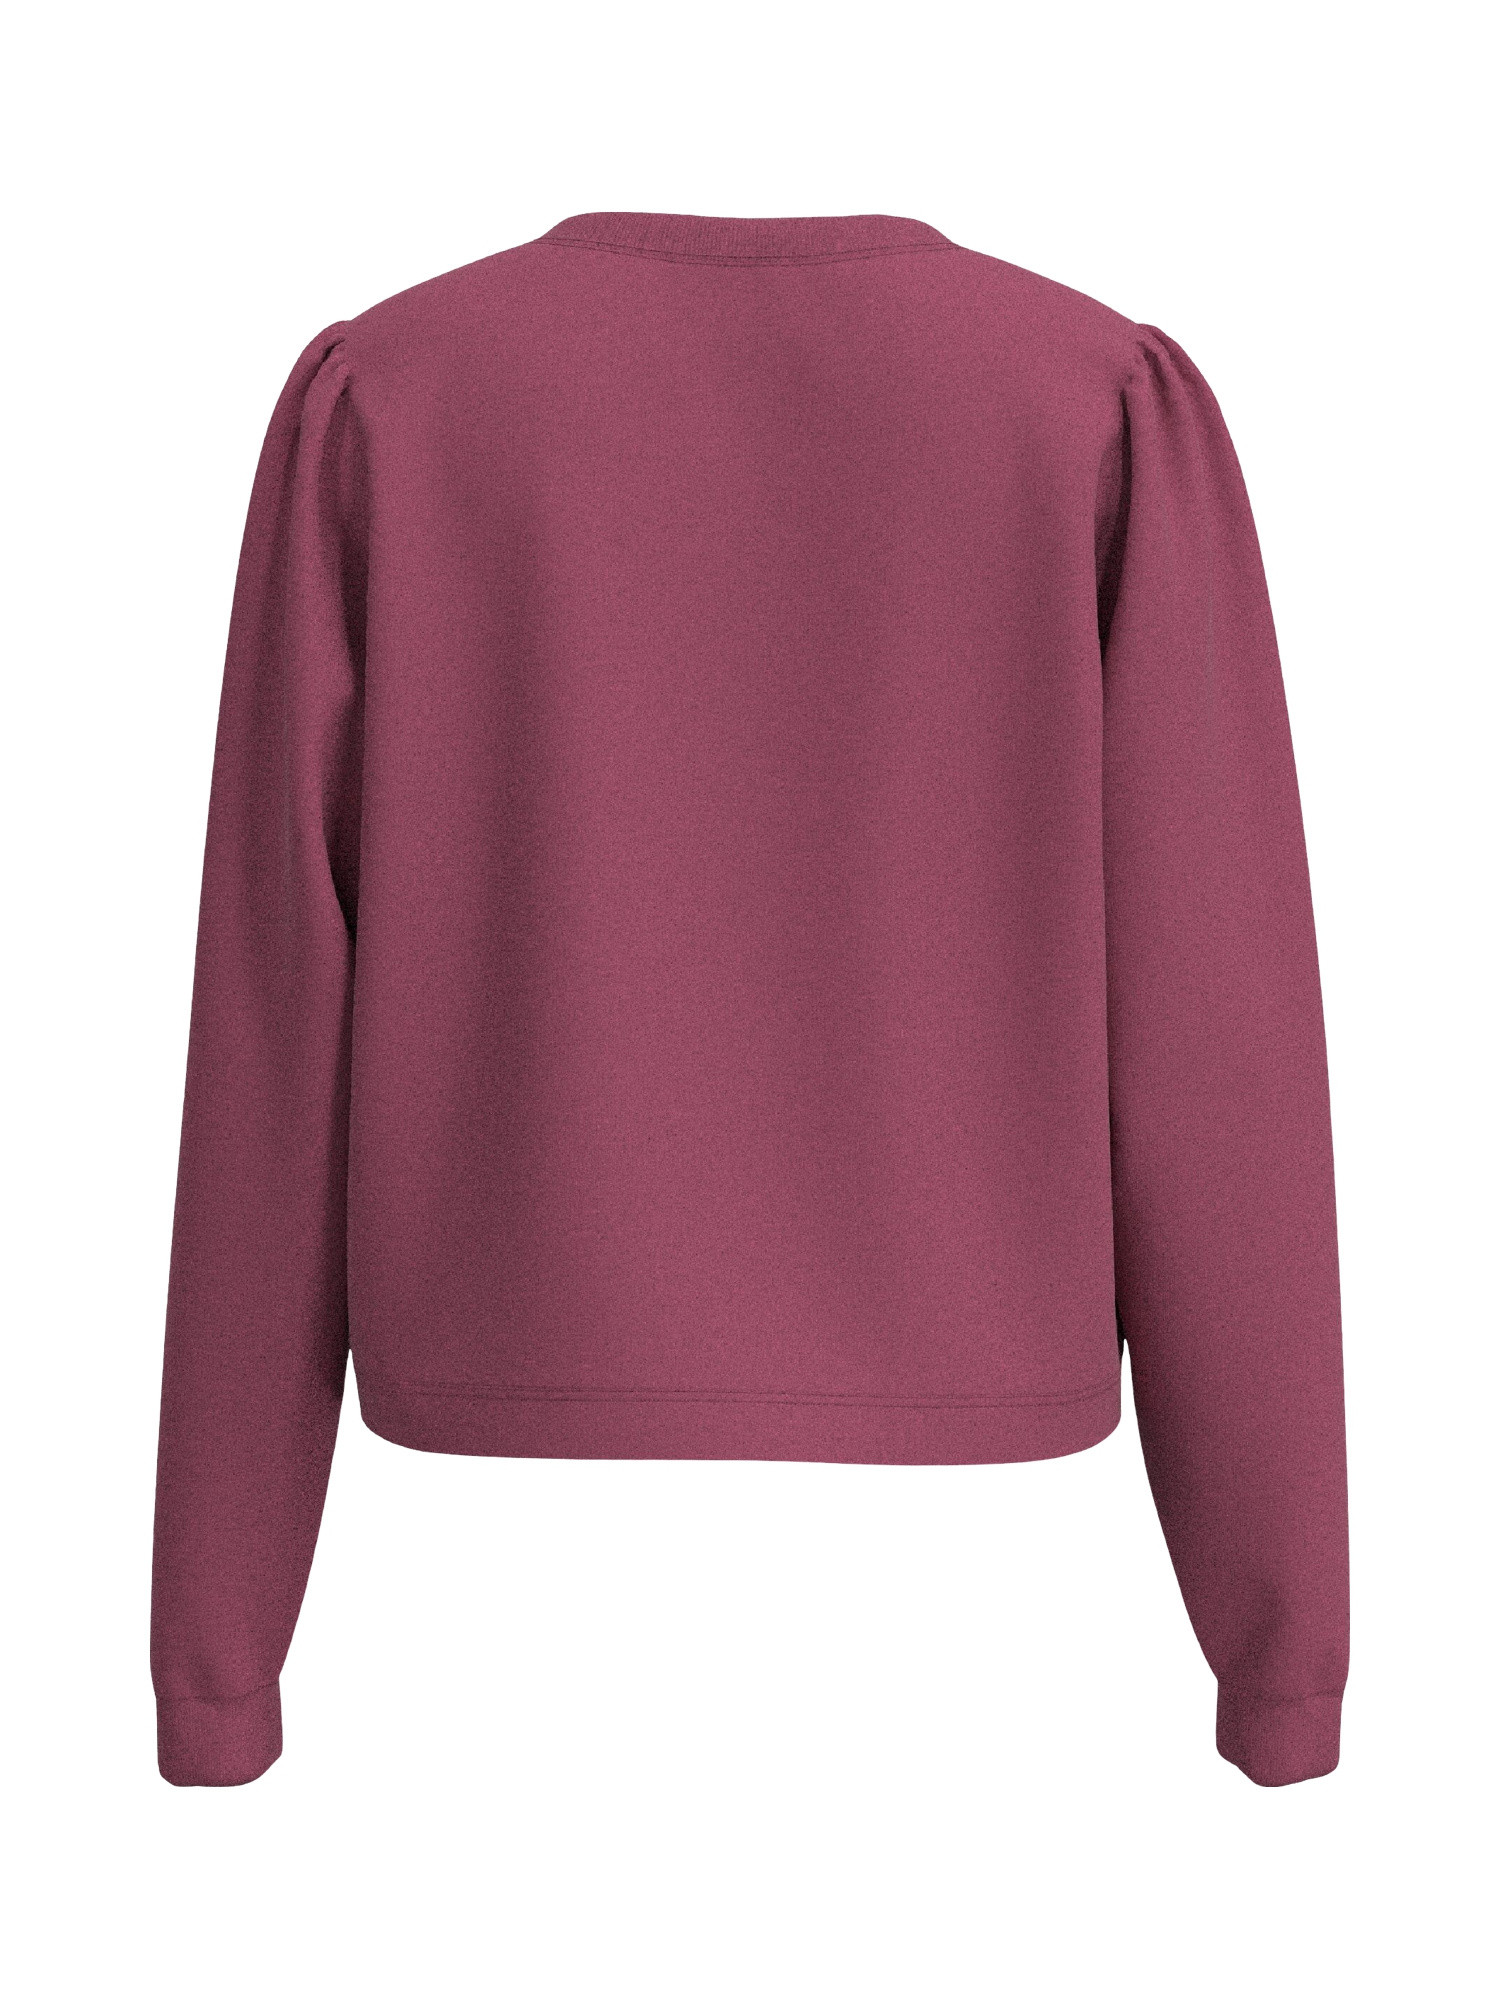 Pepe Jeans - Sweatshirt with puff sleeves, Antique Pink, large image number 1